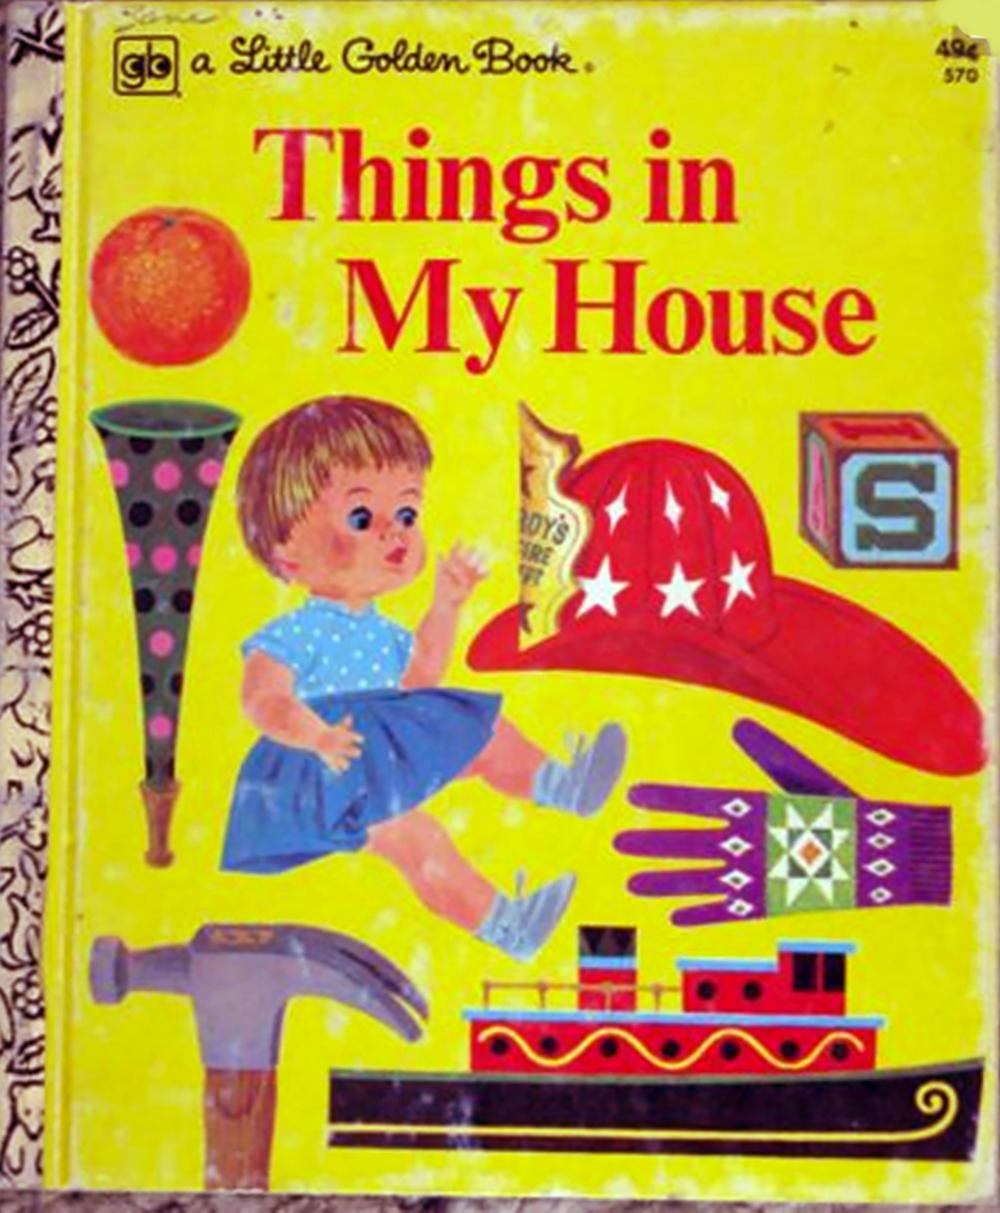 Things in My House” Little Golden Book, Children's Book  CoverIllustration Art  - Painting by Joe Kaufman